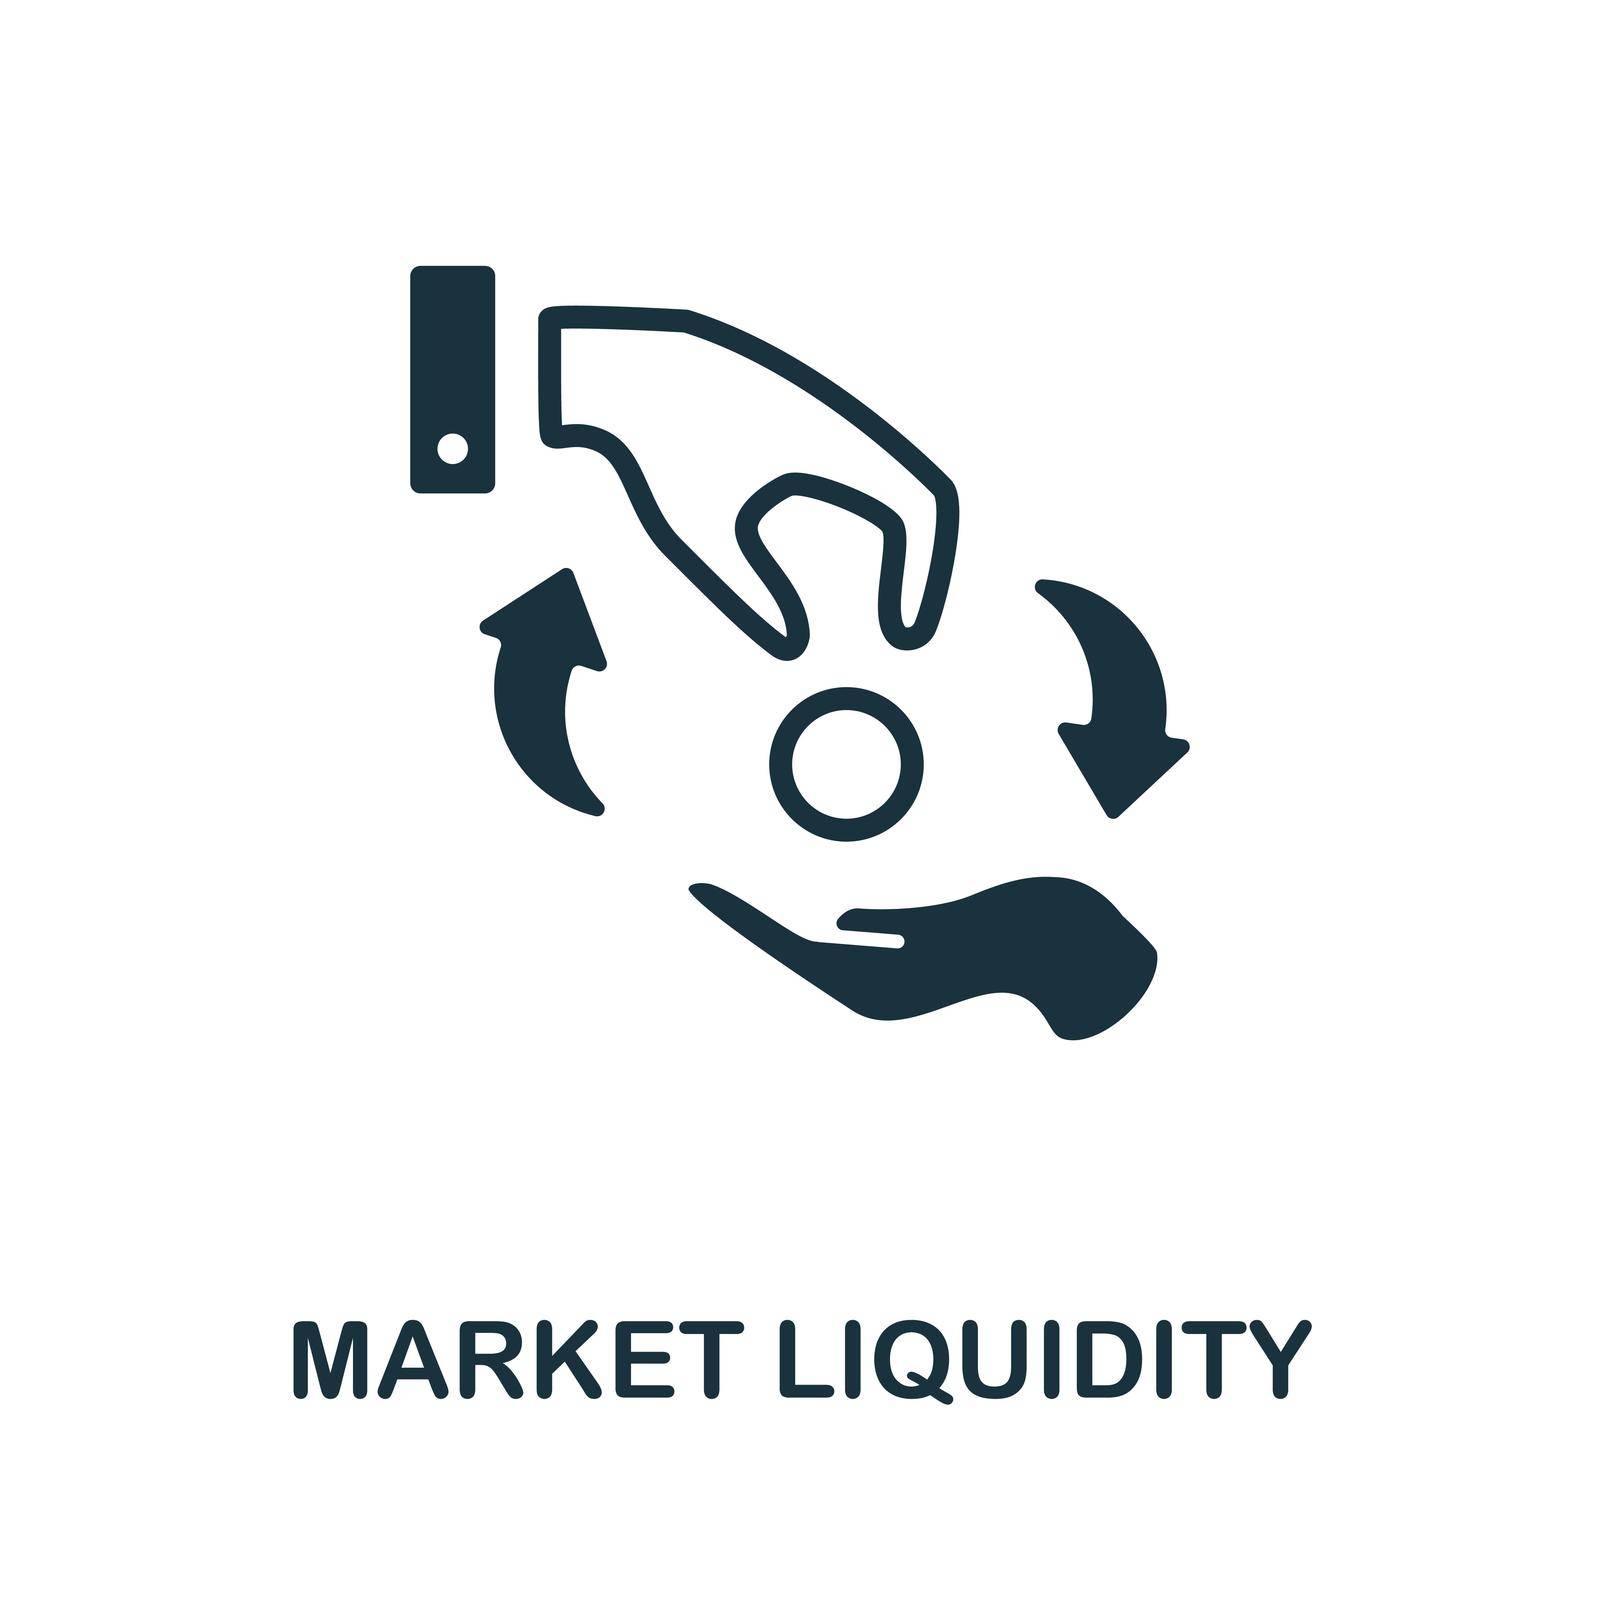 Market Liquidity icon. Monochrome sign from market economy collection. Creative Market Liquidity icon illustration for web design, infographics and more by simakovavector